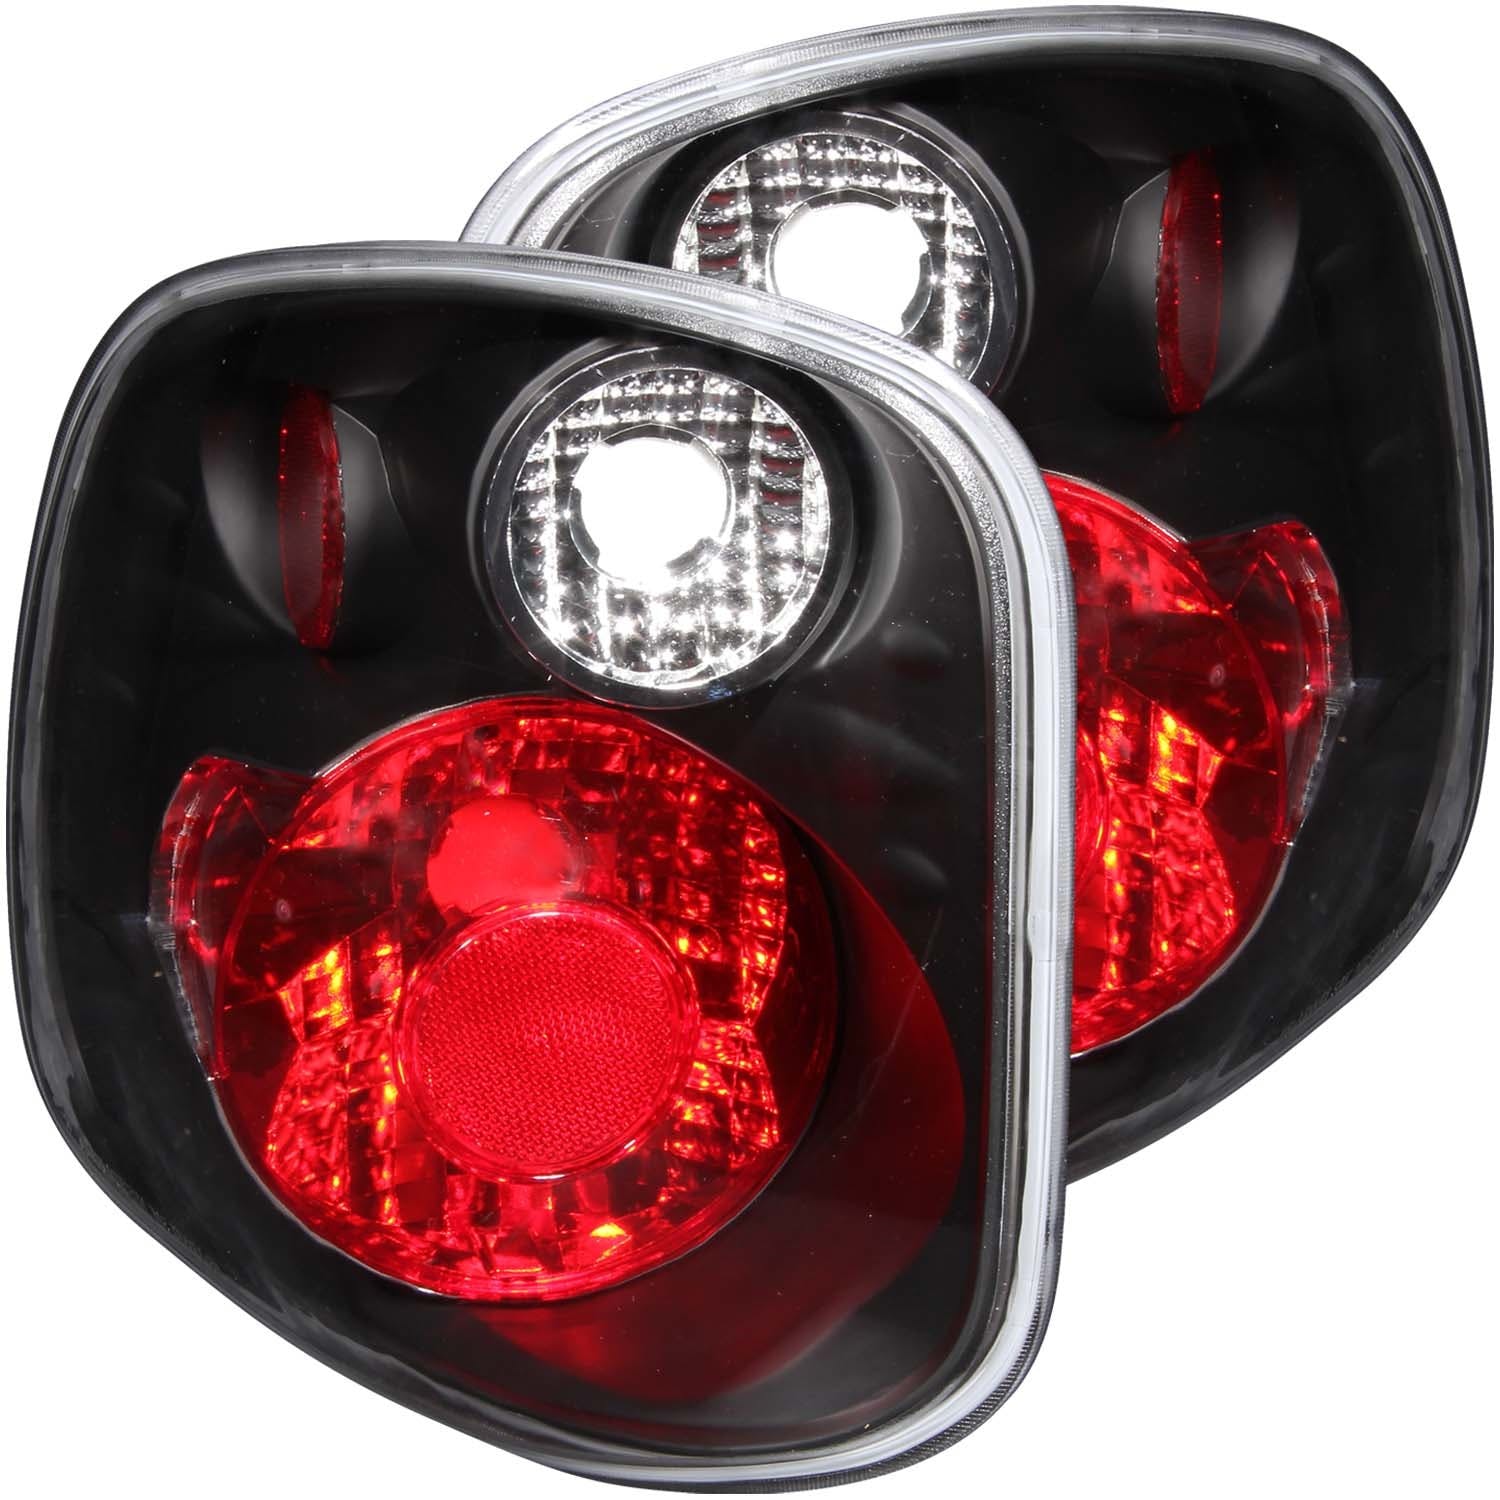 AnzoUSA 211143 Taillights Black